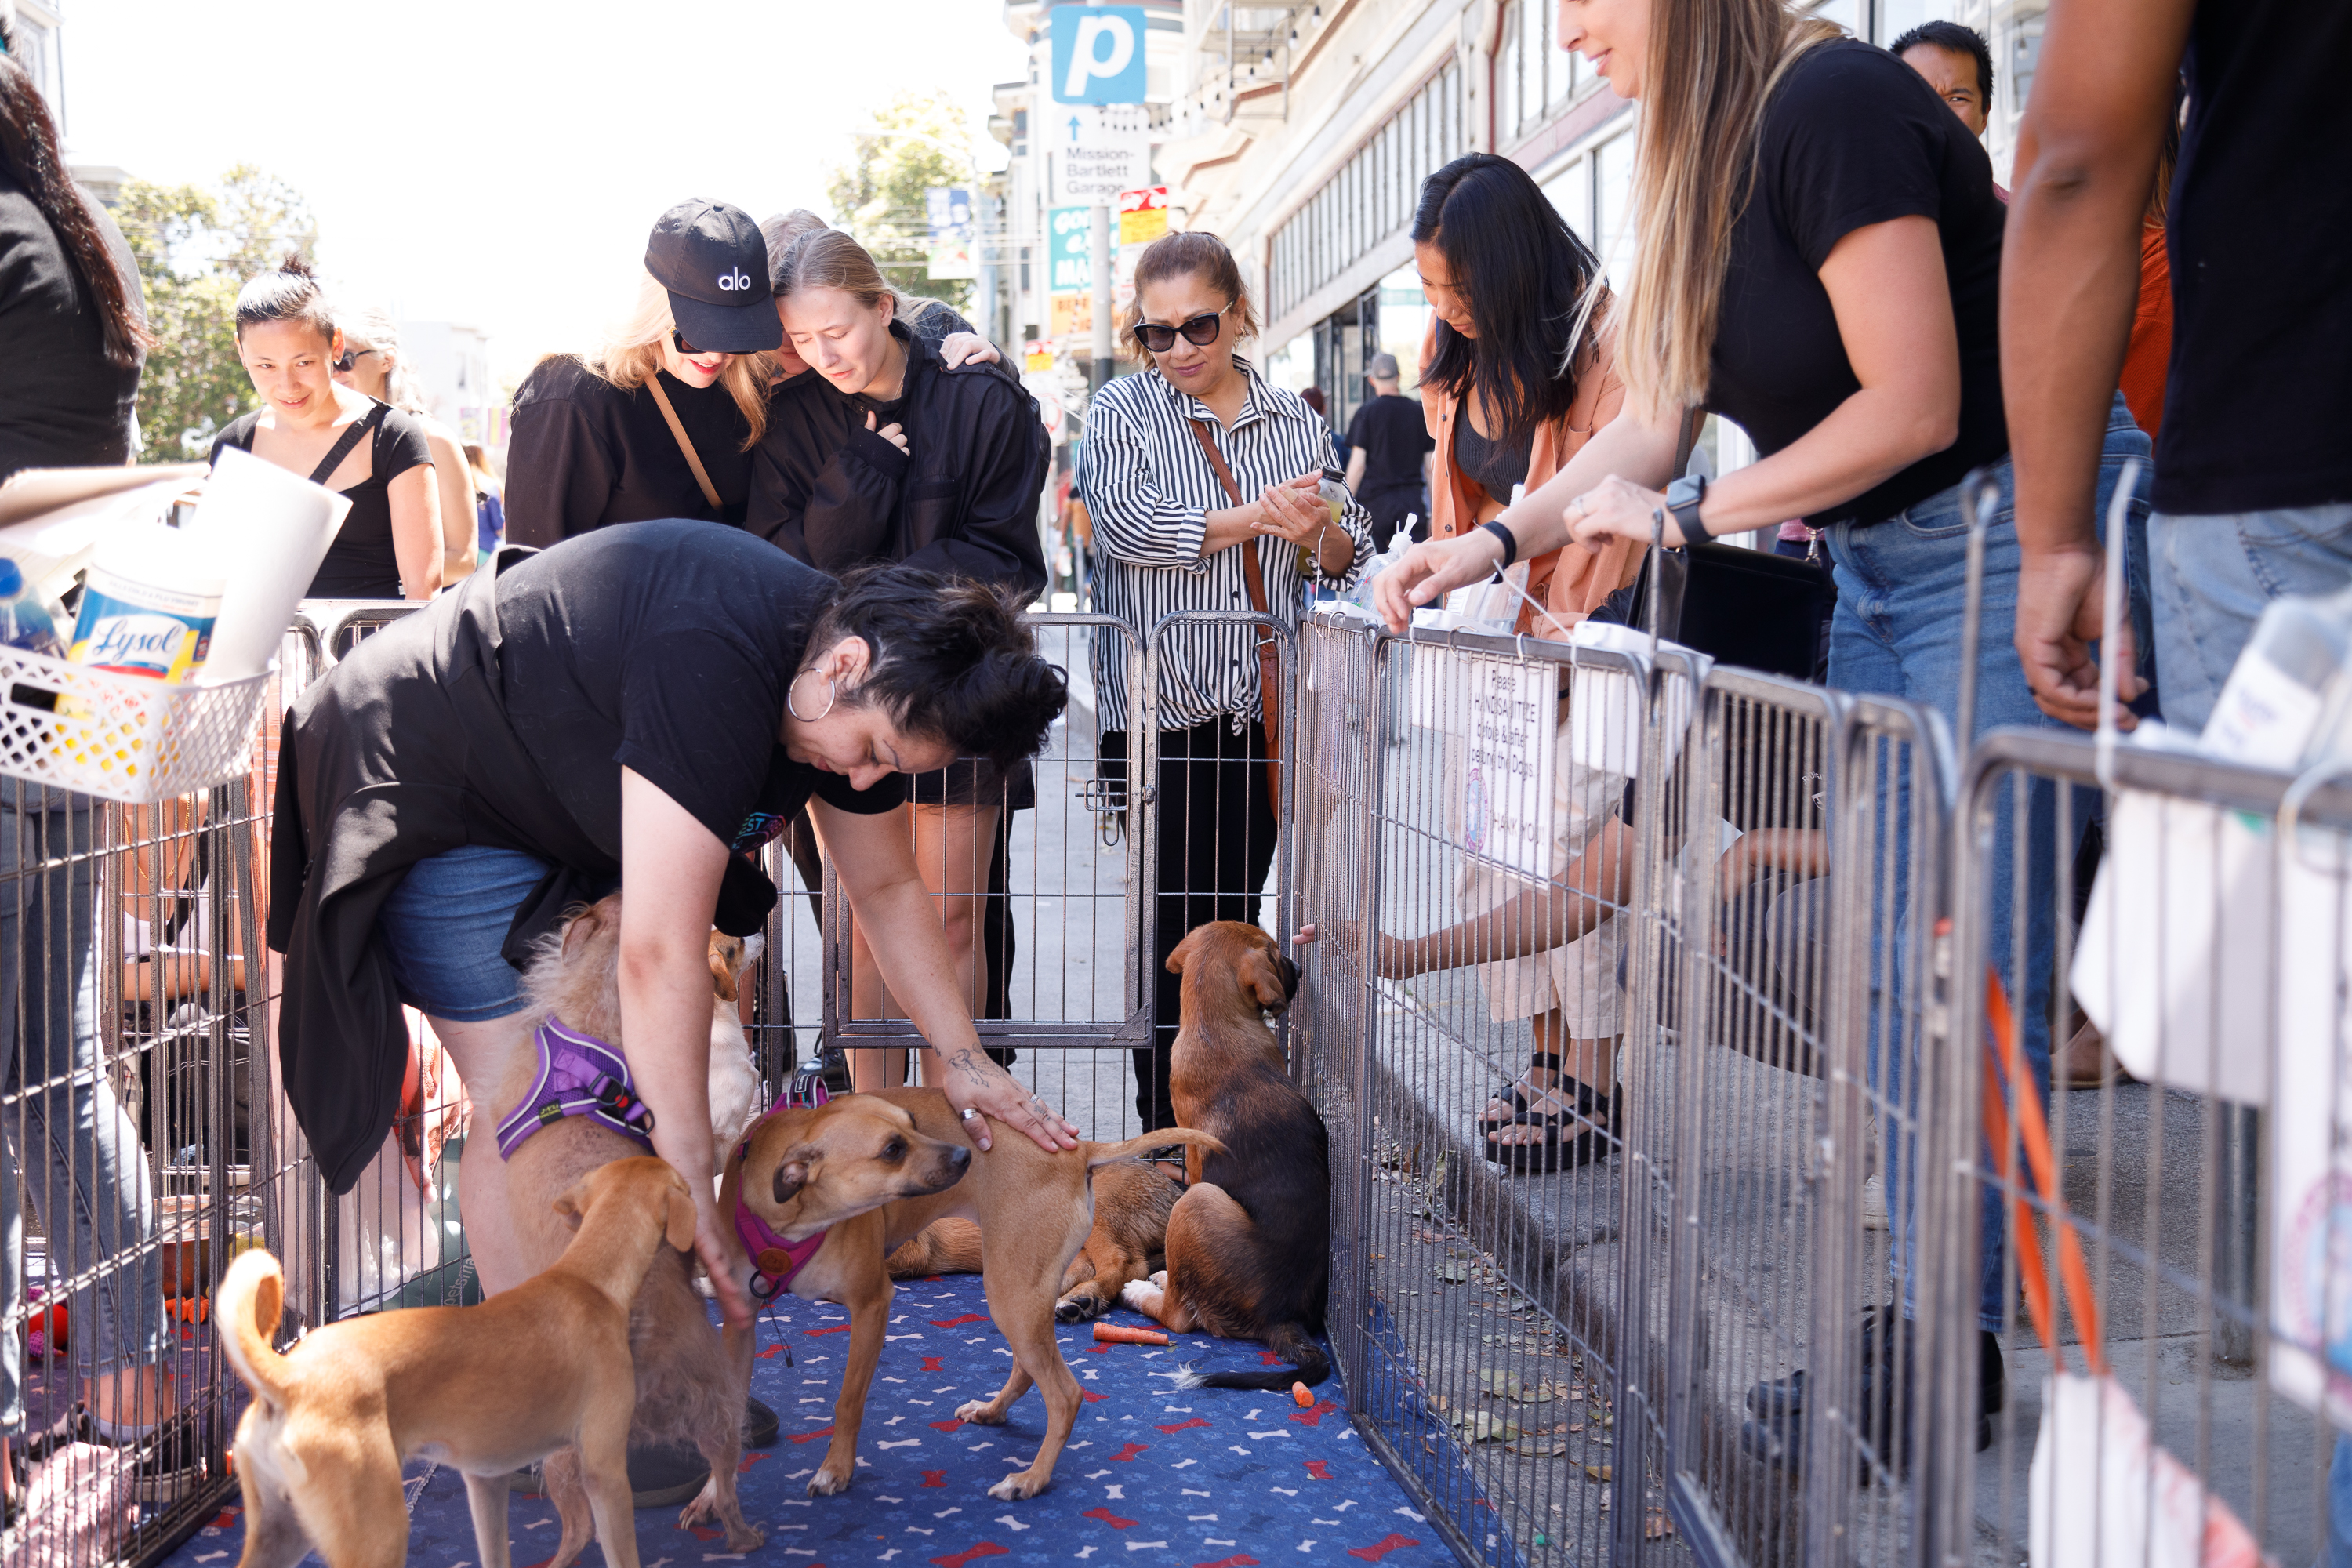 A woman pets dogs in a fenced area on a street as onlookers gather around.